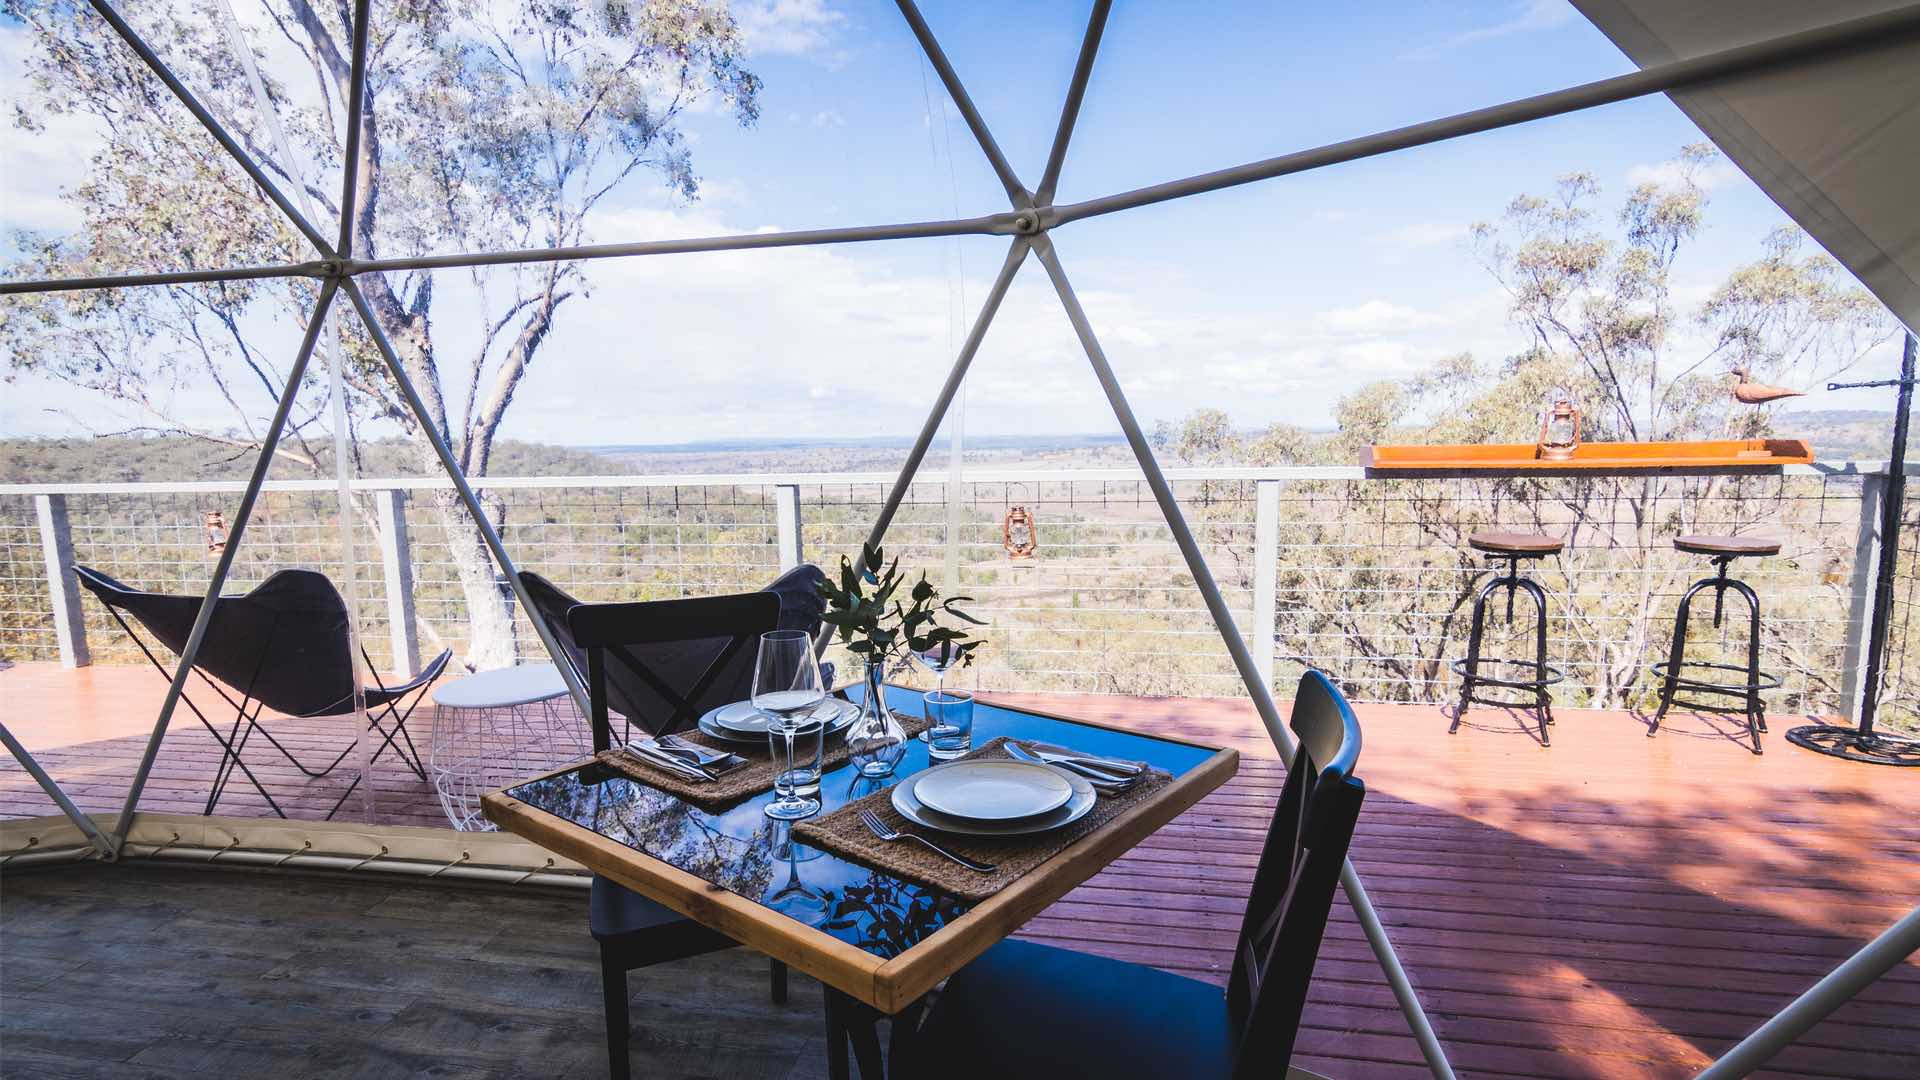 You Can Now Escape to a Luxury Dome Tent in the Middle of the NSW Bush